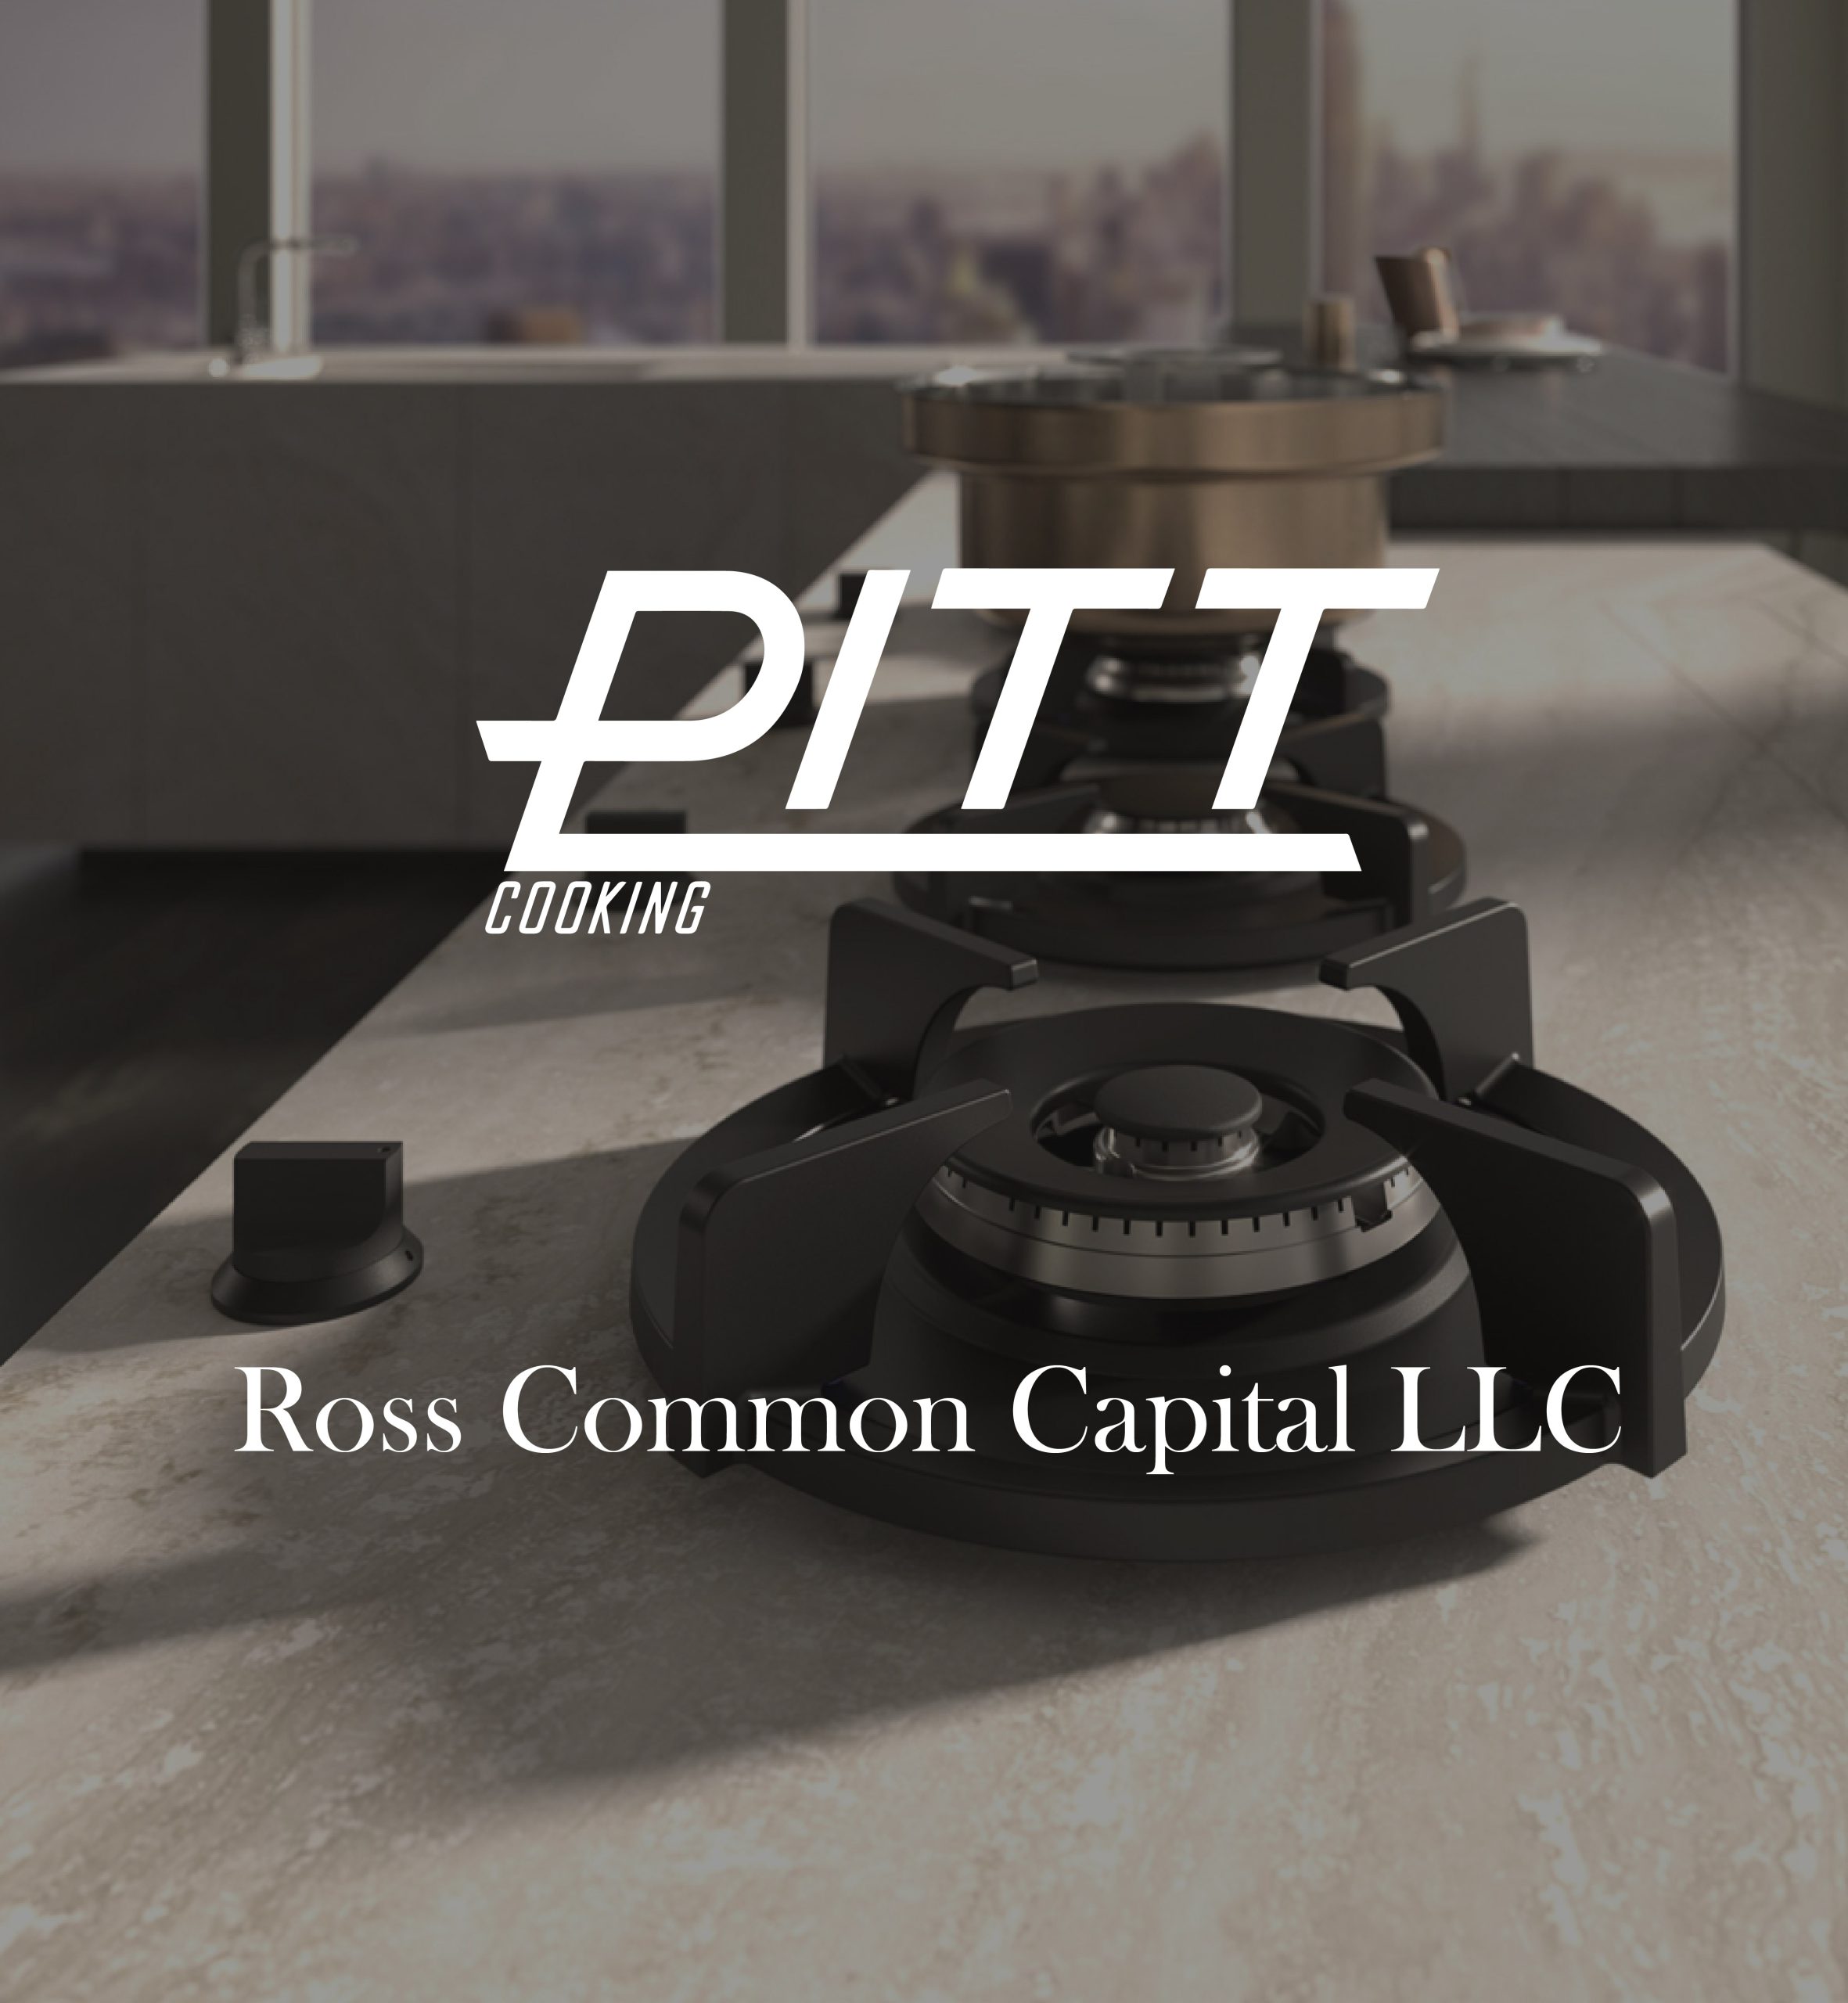 DEX international M&A advised PITT Cooking on the sale to Ross Common Capital